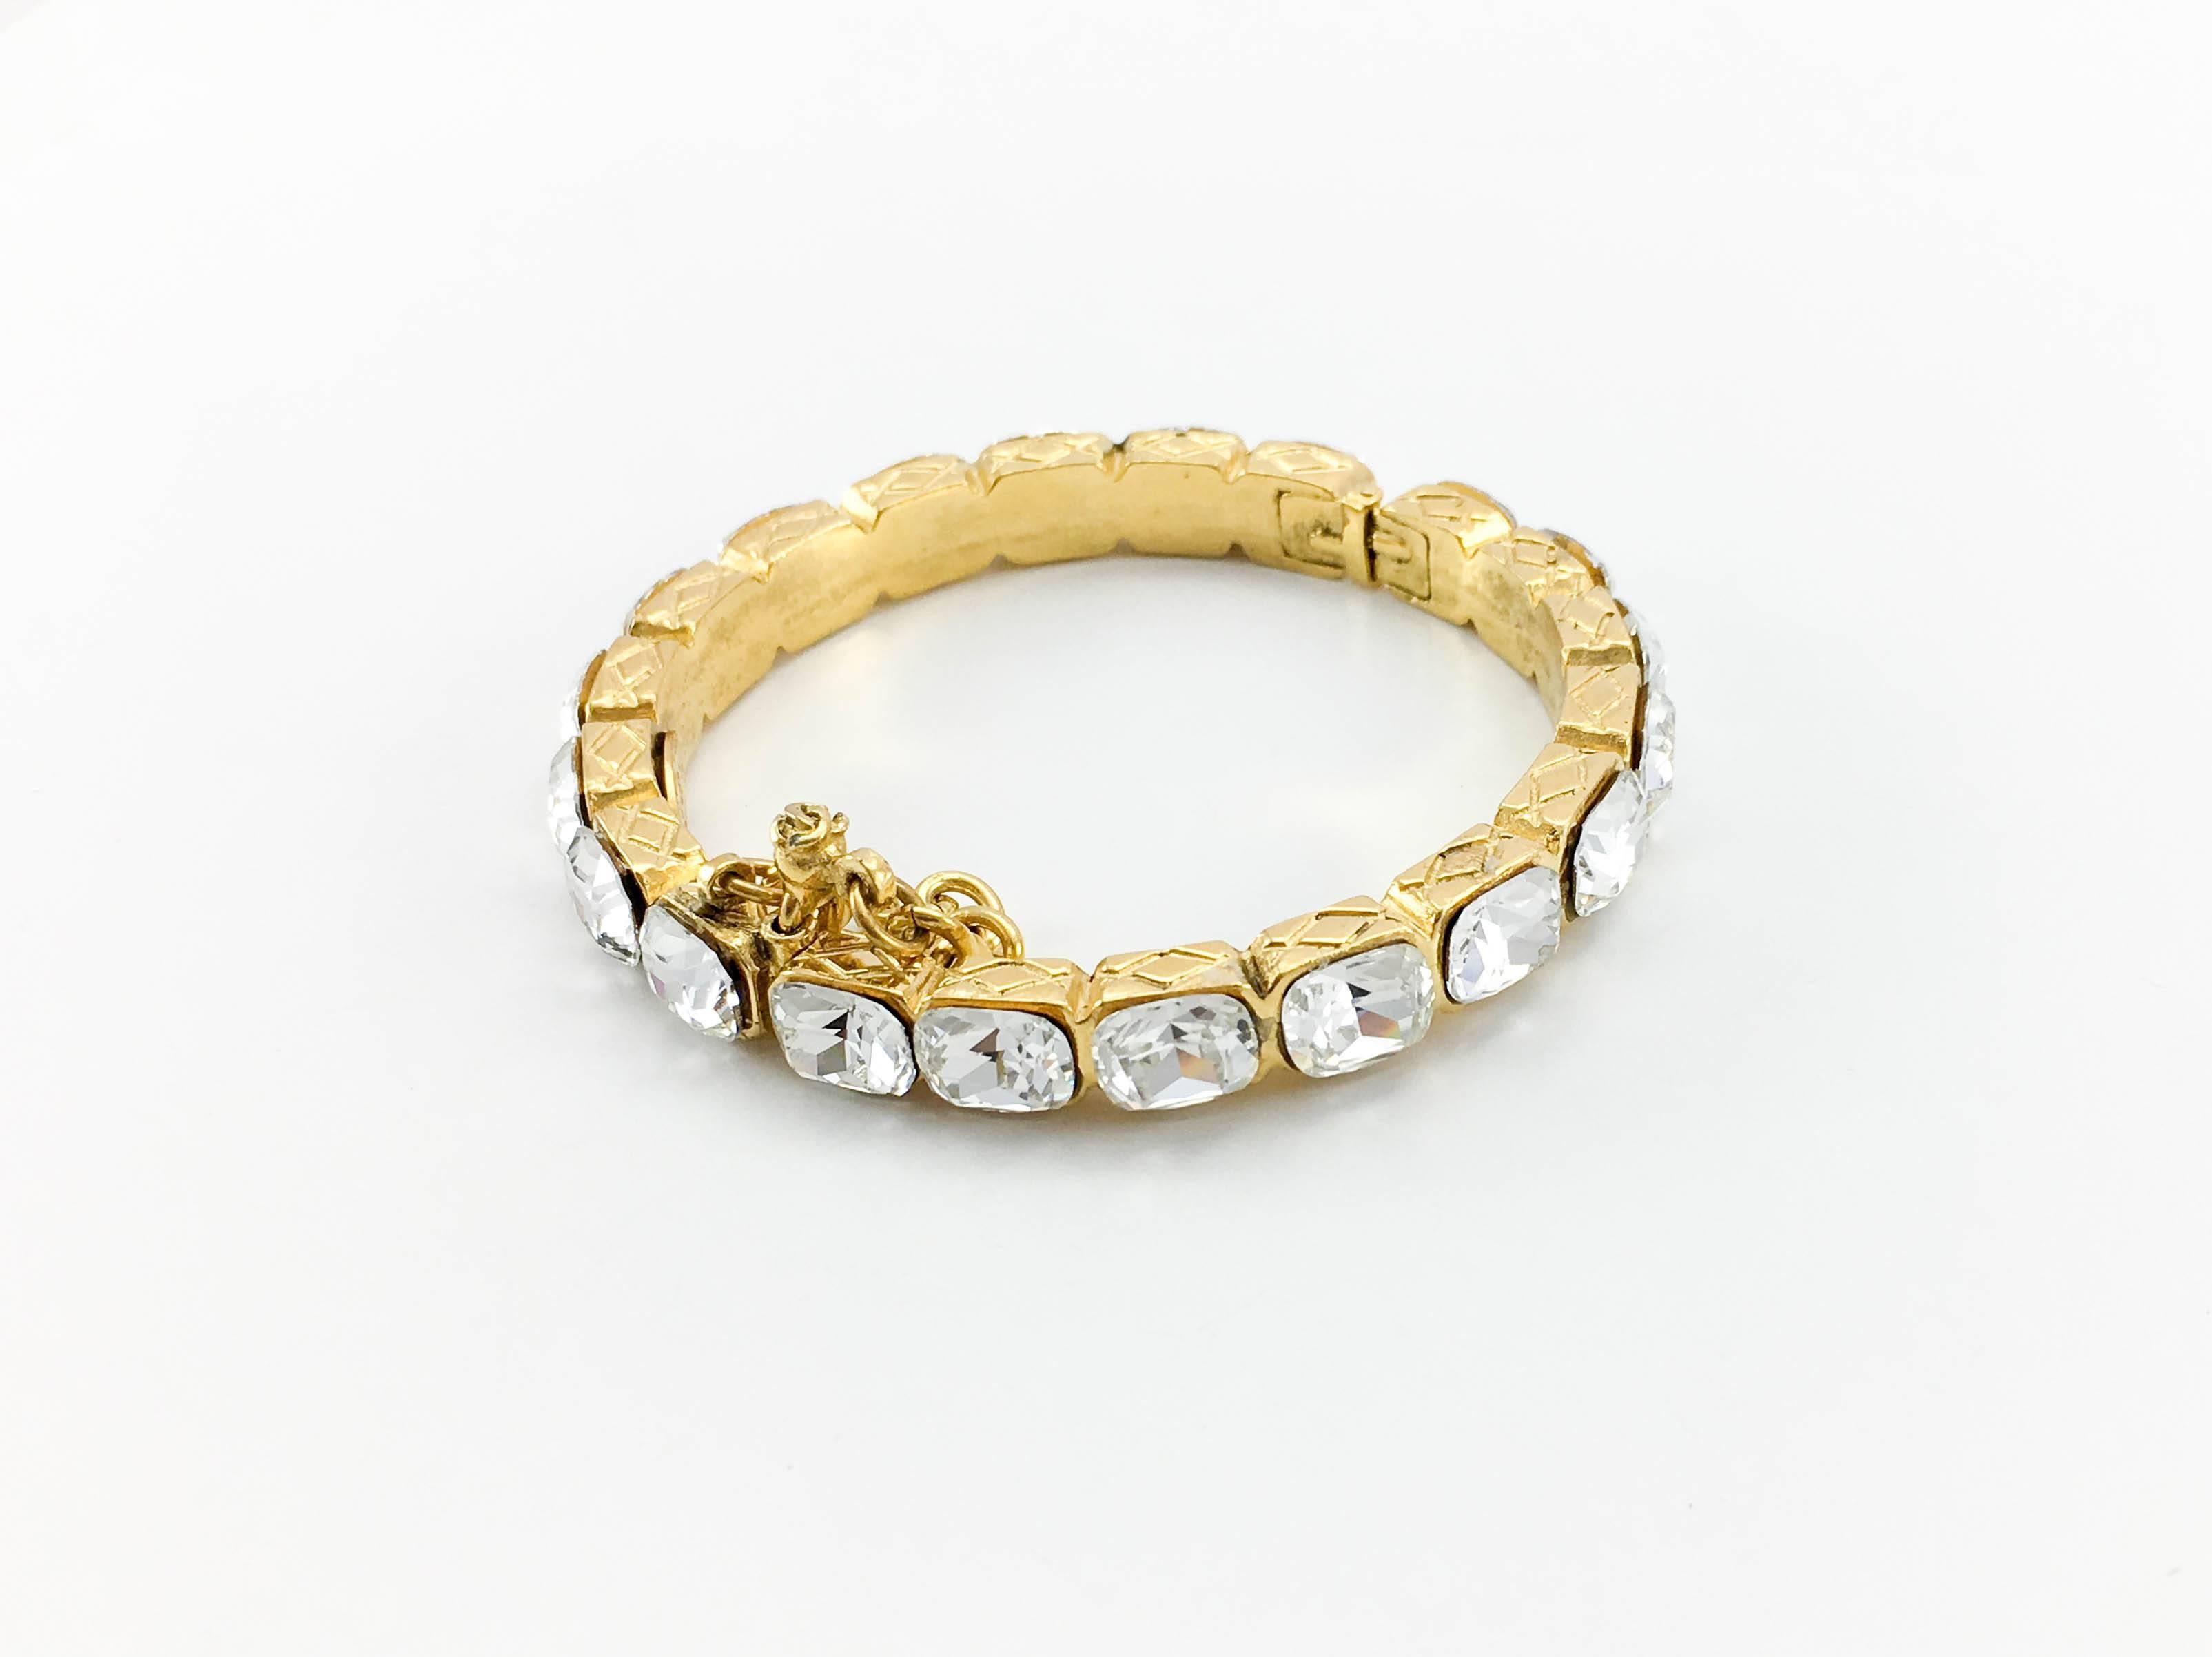 1986 Chanel Gold-Plated Quilted Bracelet Embellished With Crystals In Excellent Condition In London, Chelsea